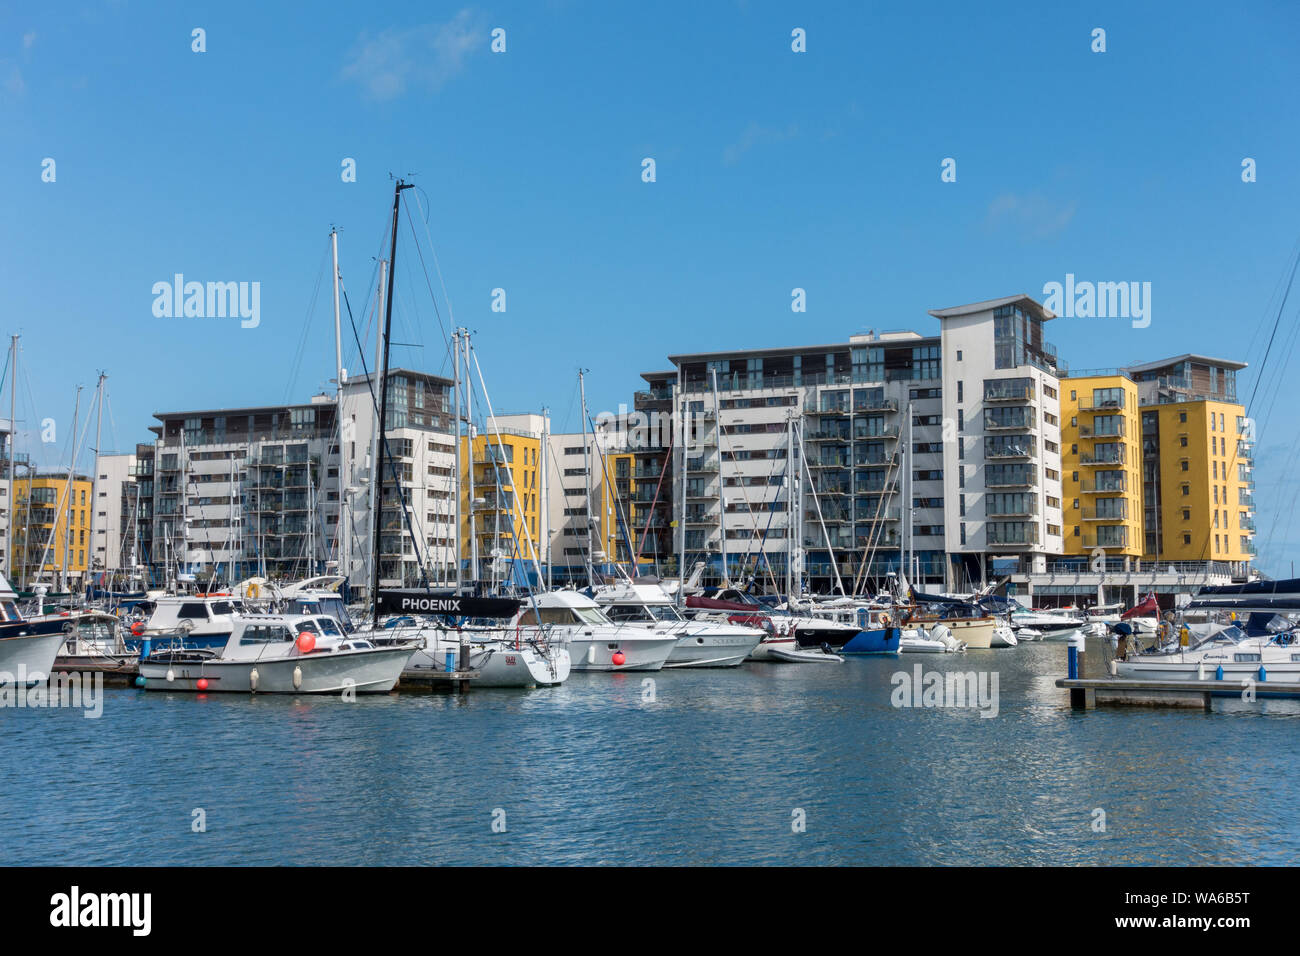 Luxury waterside apartments and boats, Sovereign Harbour, Eastbourne, East Sussex, England,UK Stock Photo